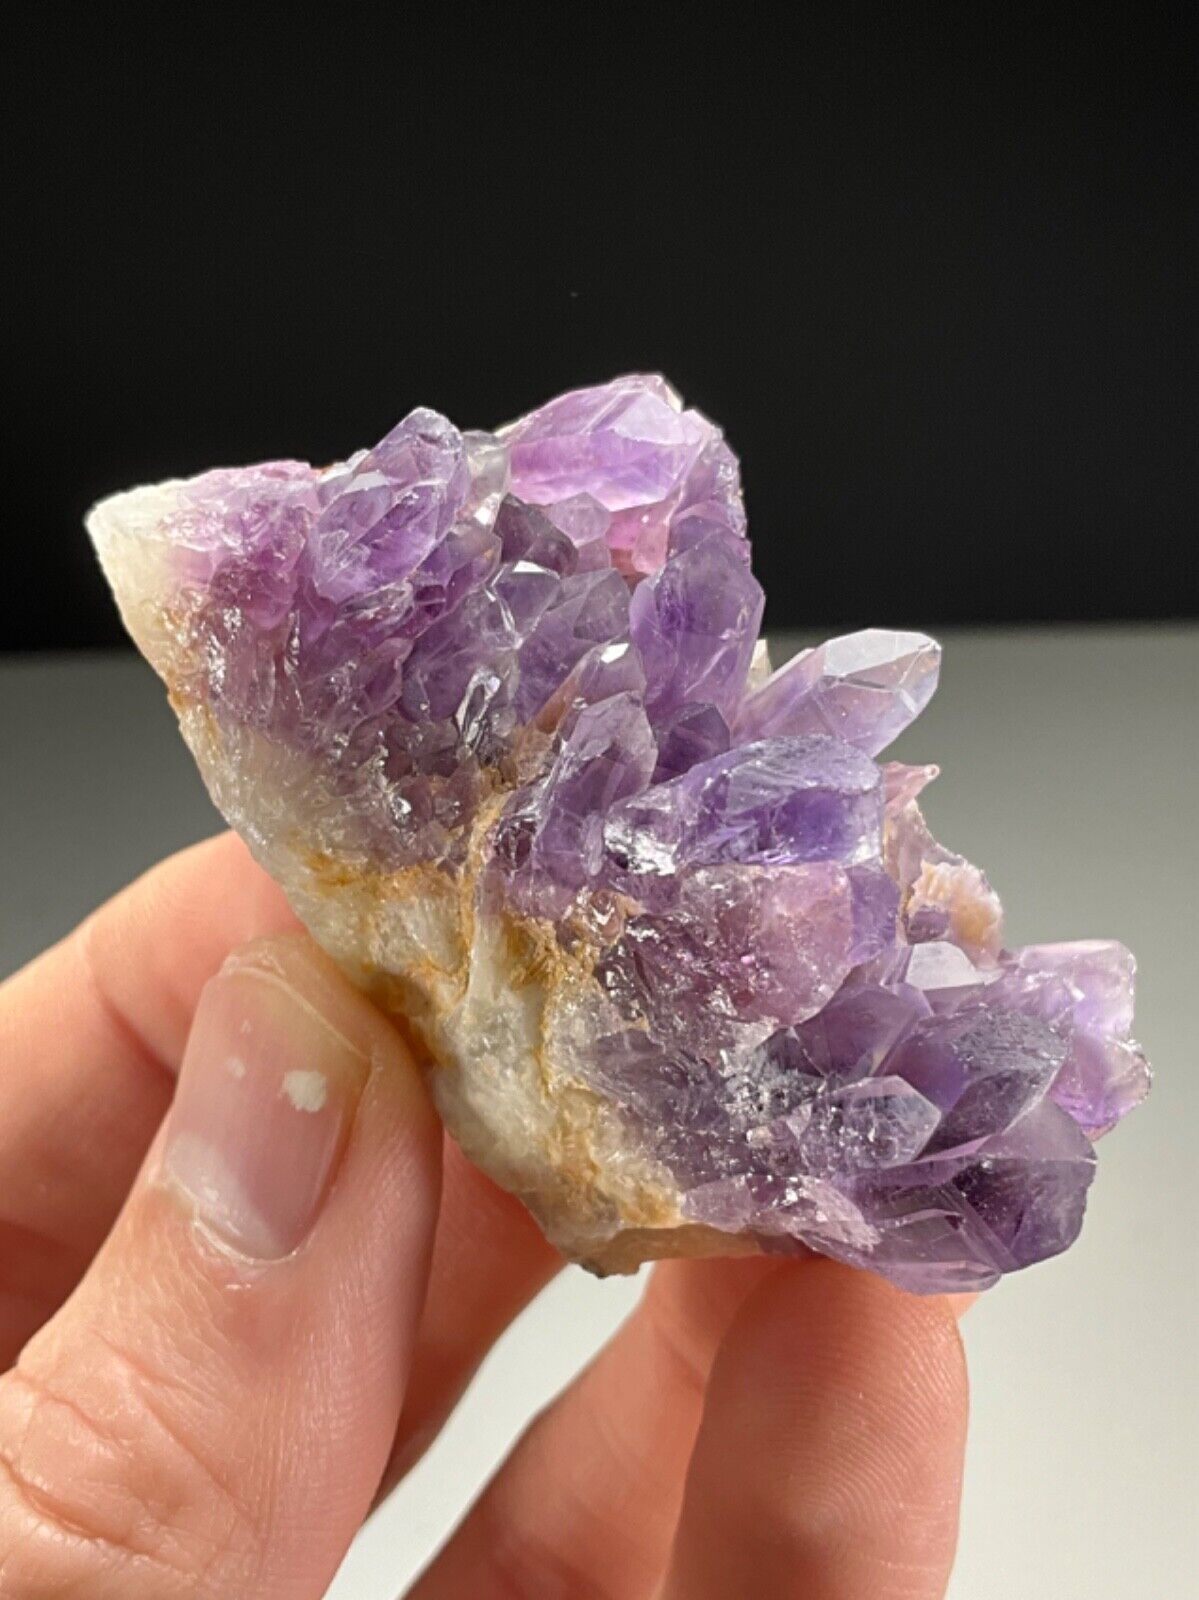 RARE AMETHYST CLUSTER FROM TAXCO, GUERRERO, MEXICO